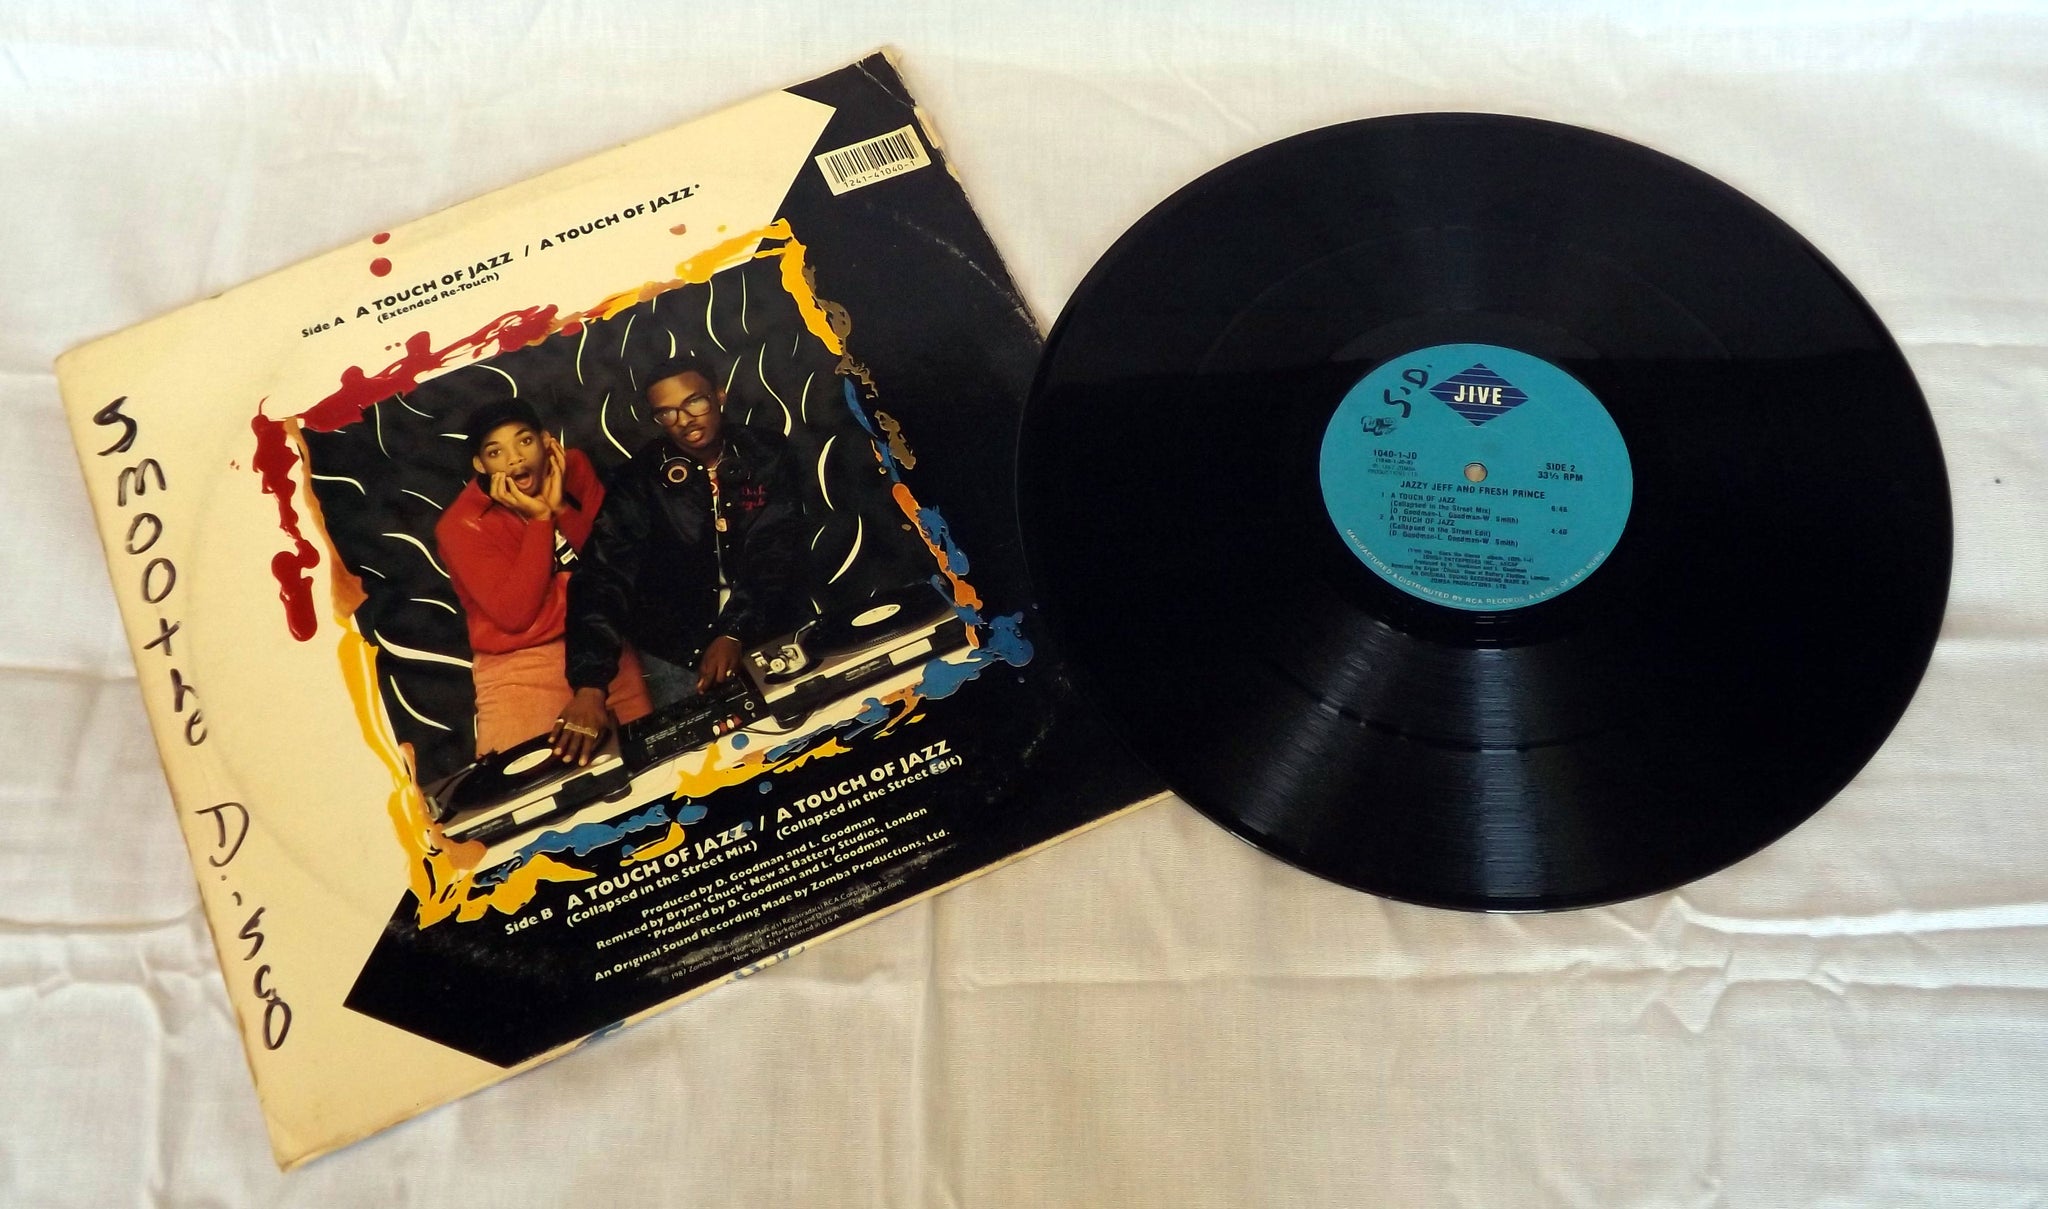 D.J. Jazzy Jeff and The Fresh Prince "A Touch of Jazz" LP – mrhollandsrecords